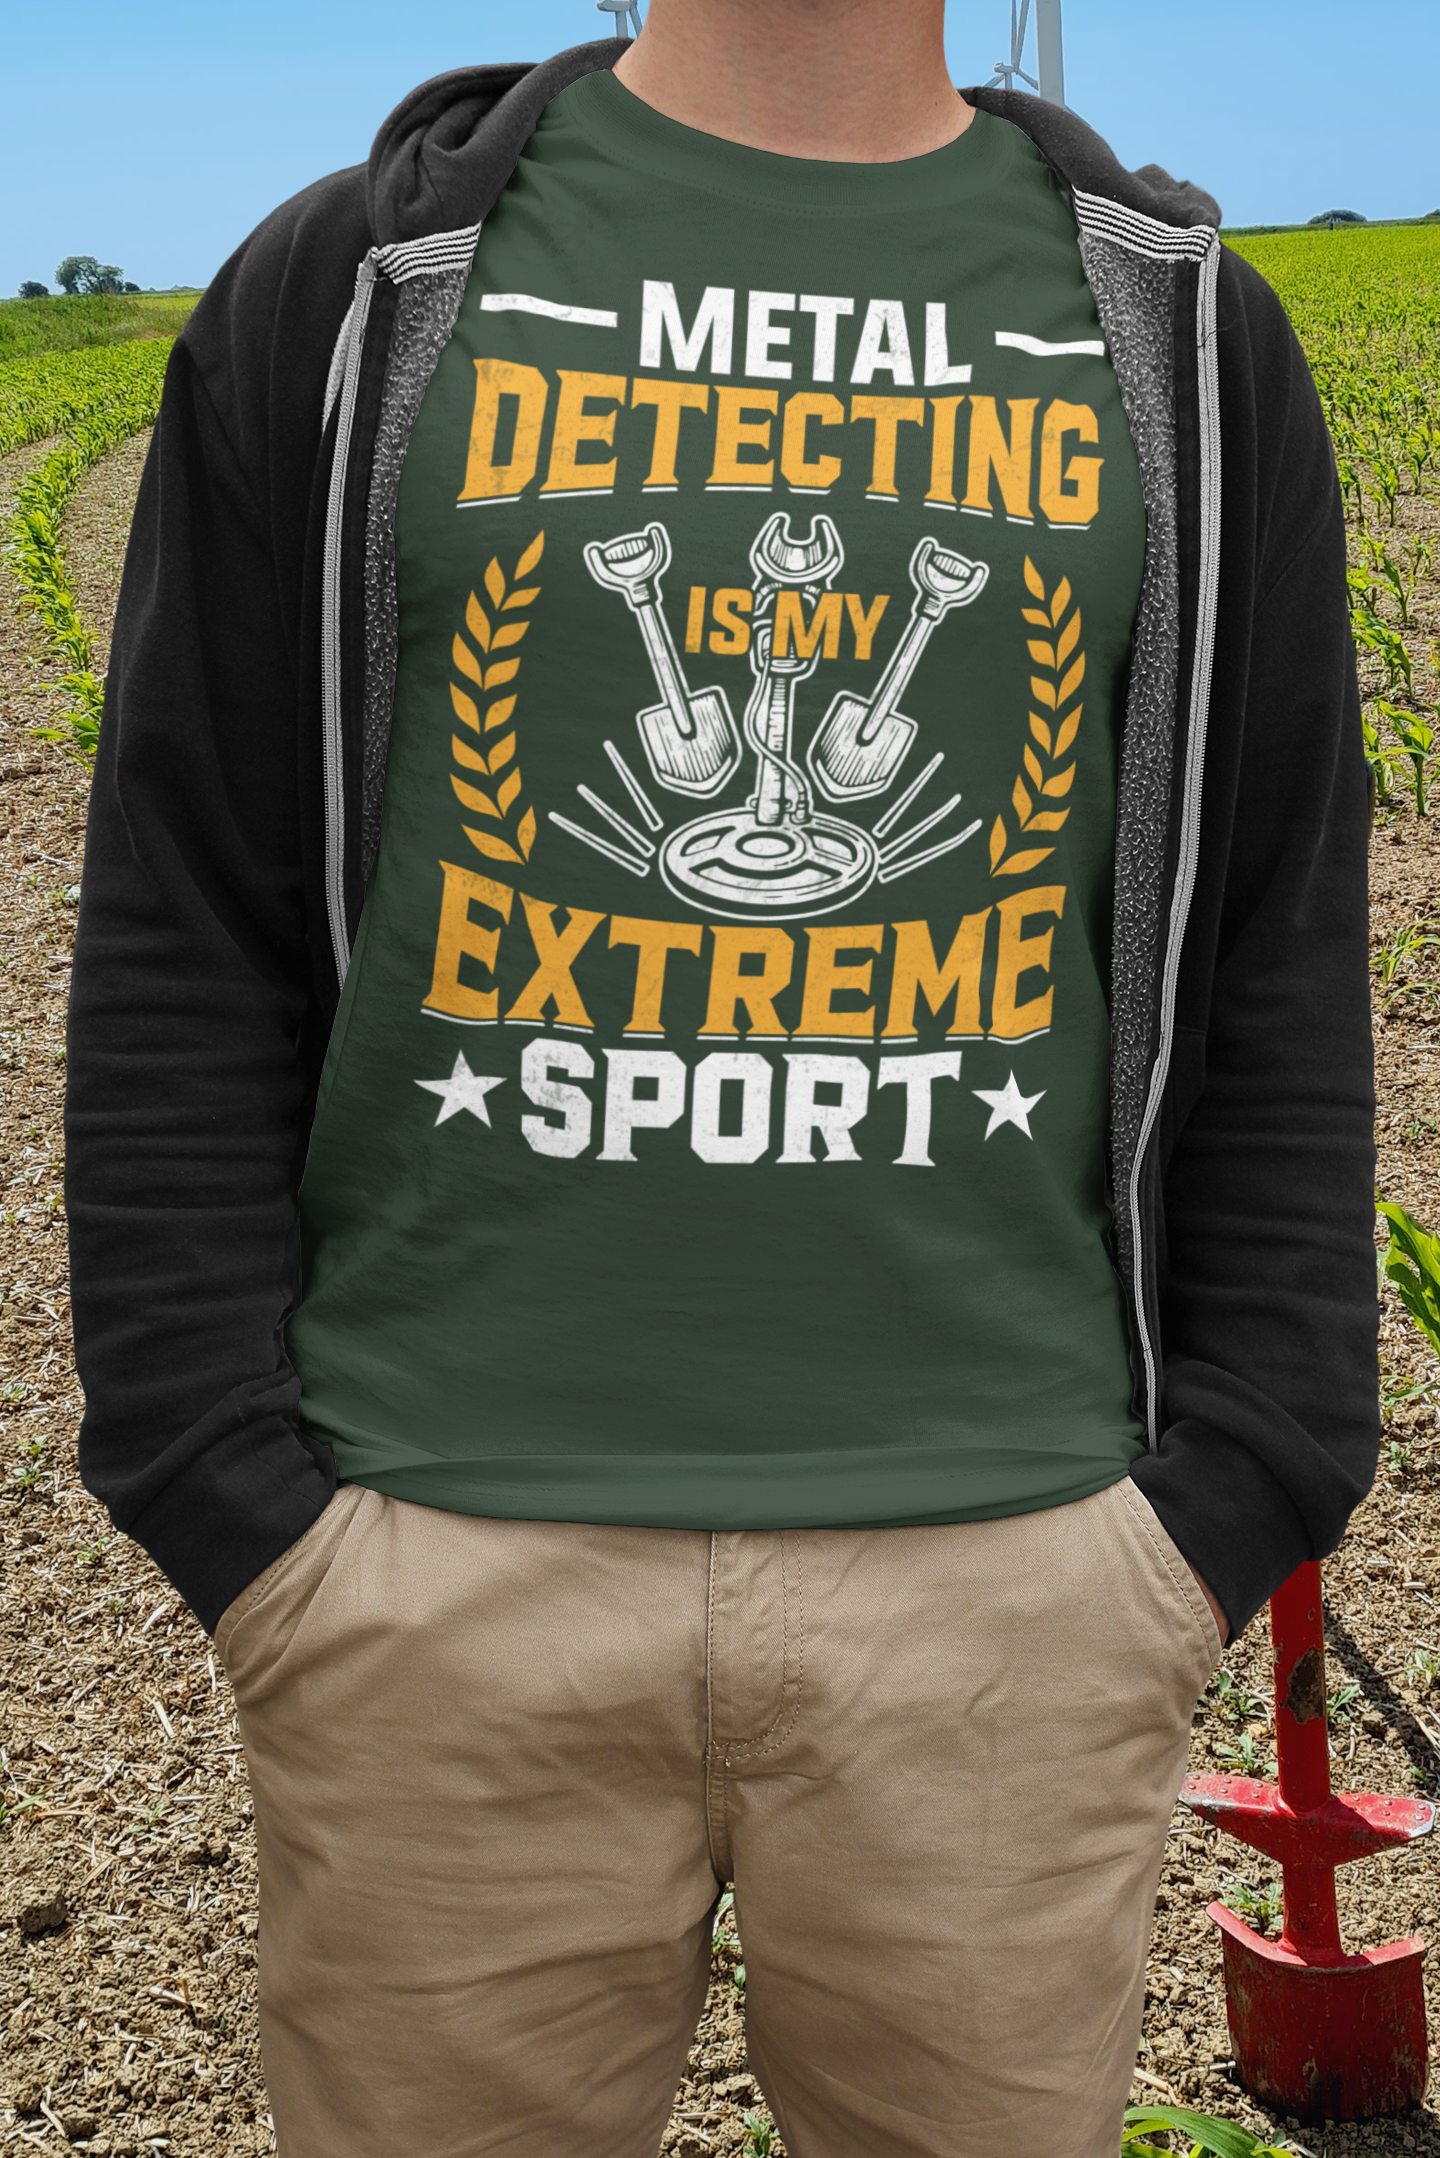 Metal detecting is my extreme sport